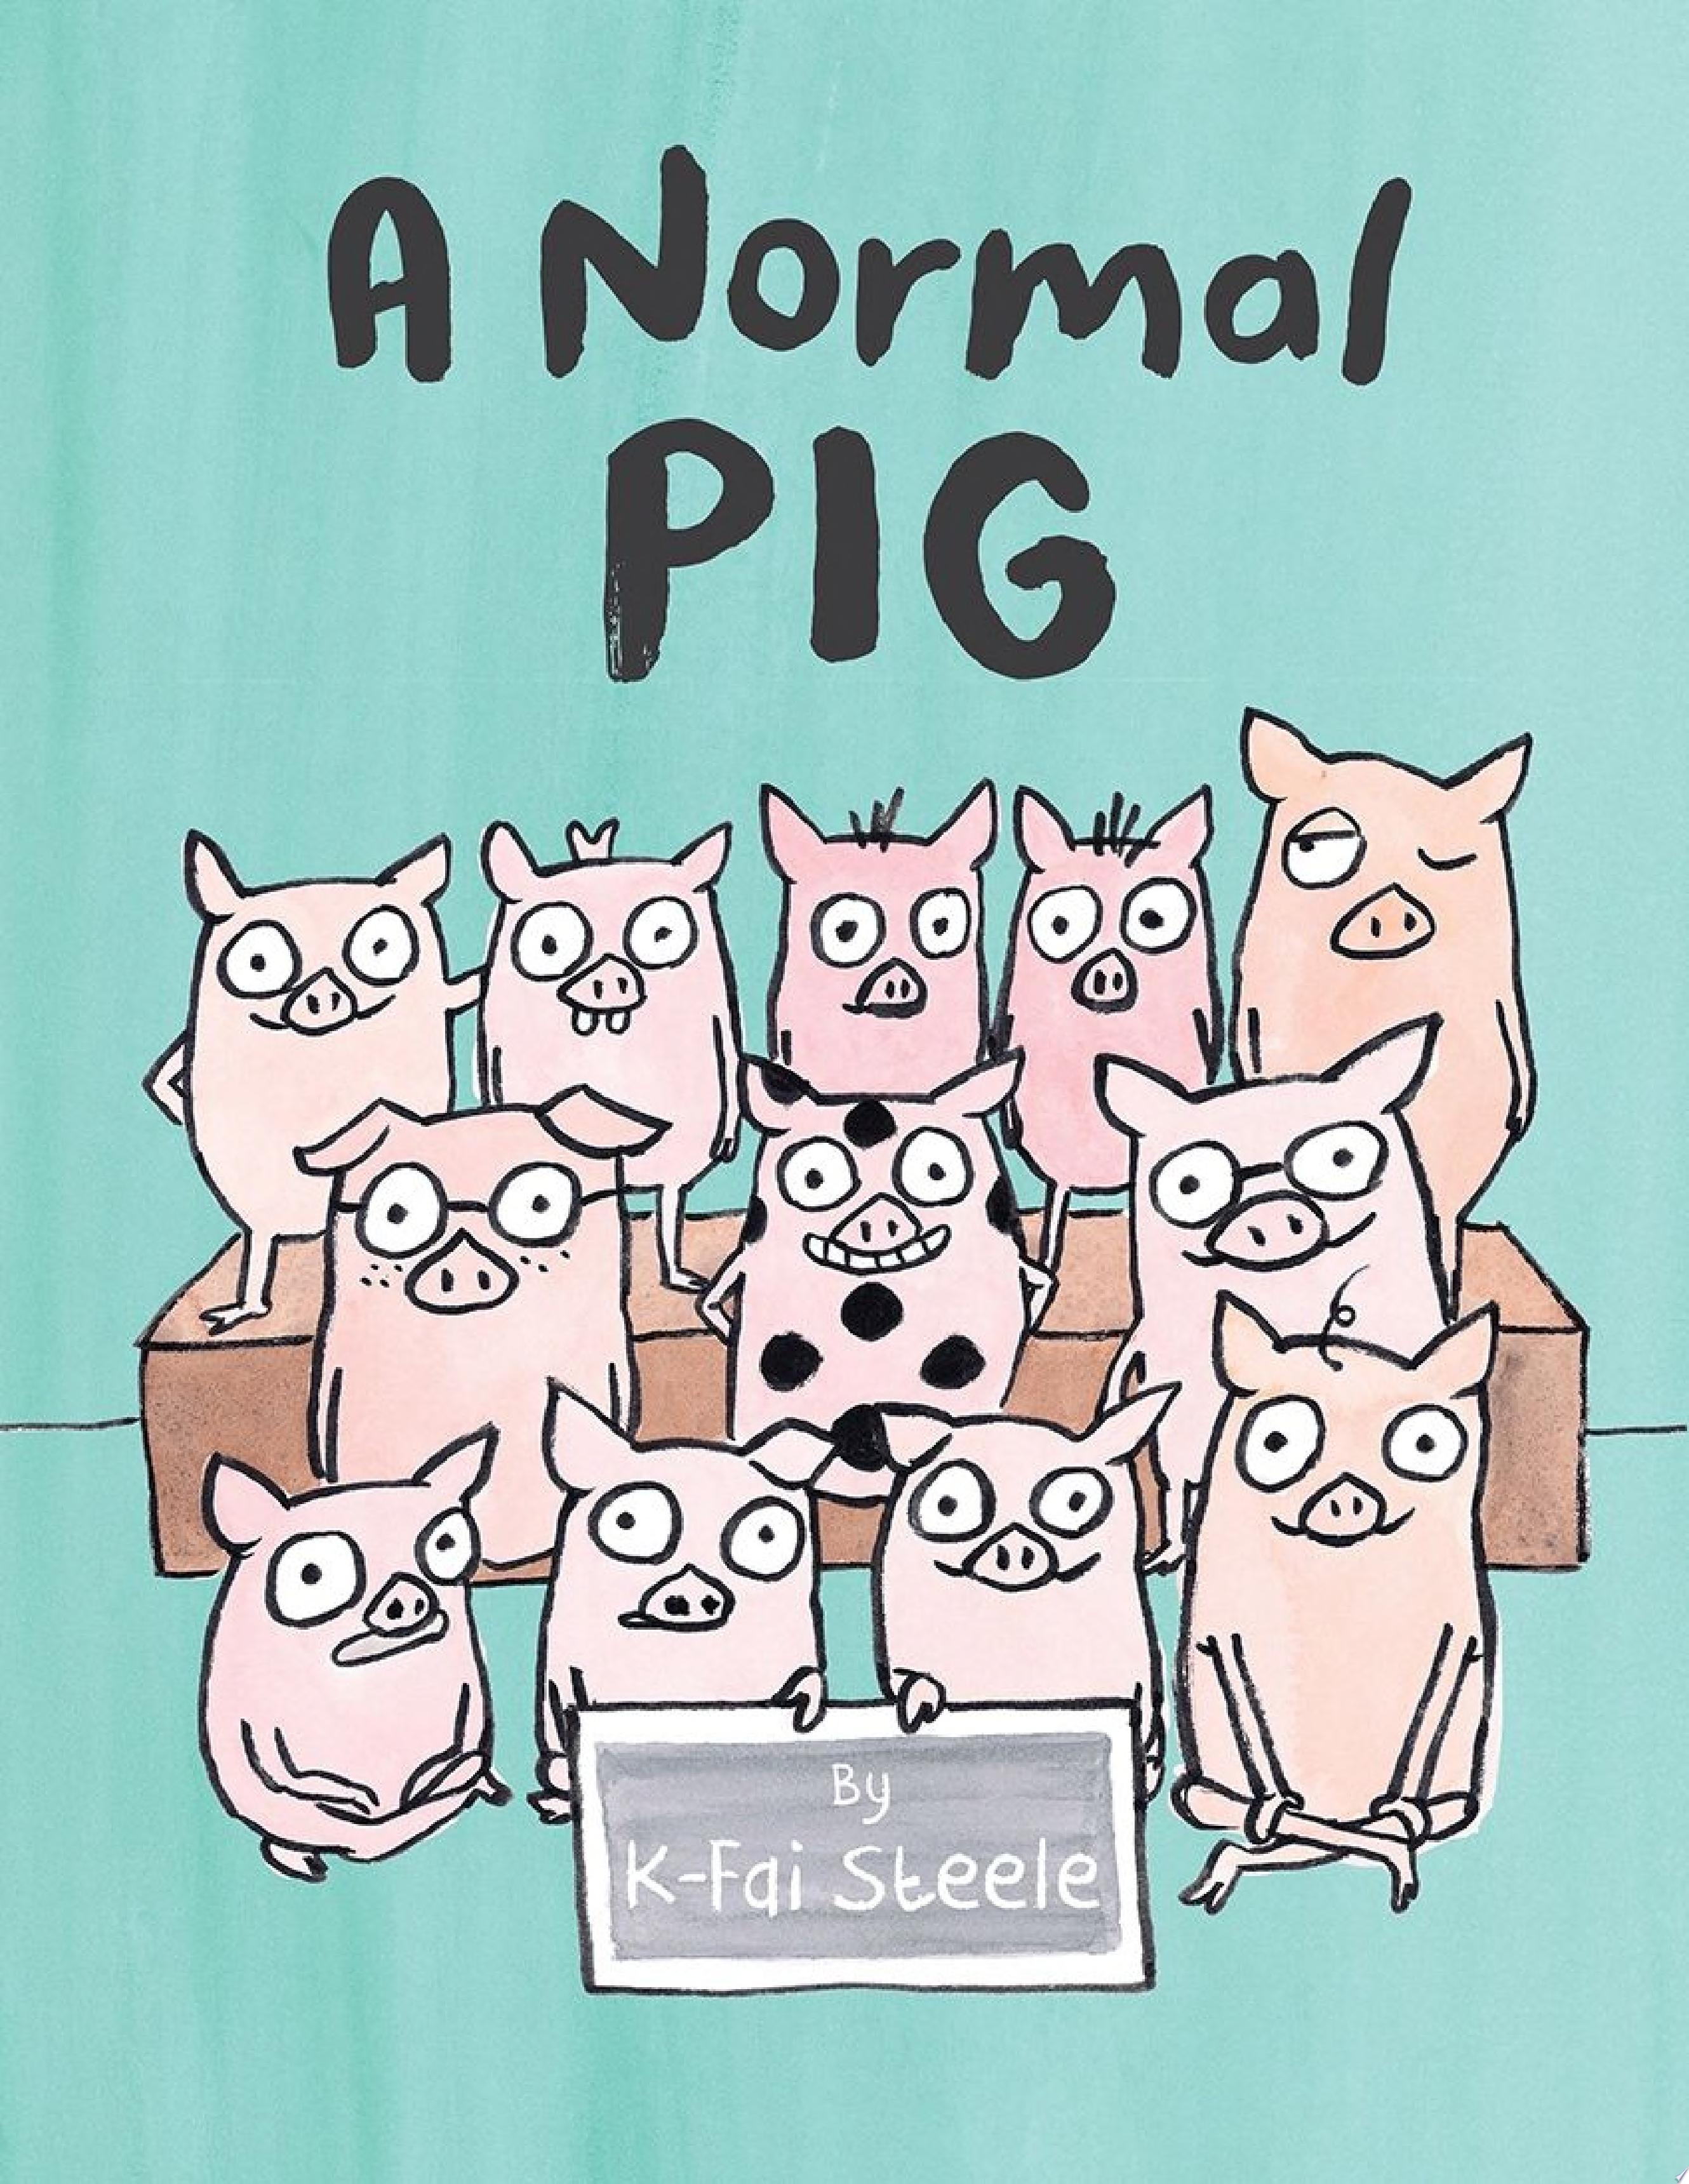 Image for "A Normal Pig"